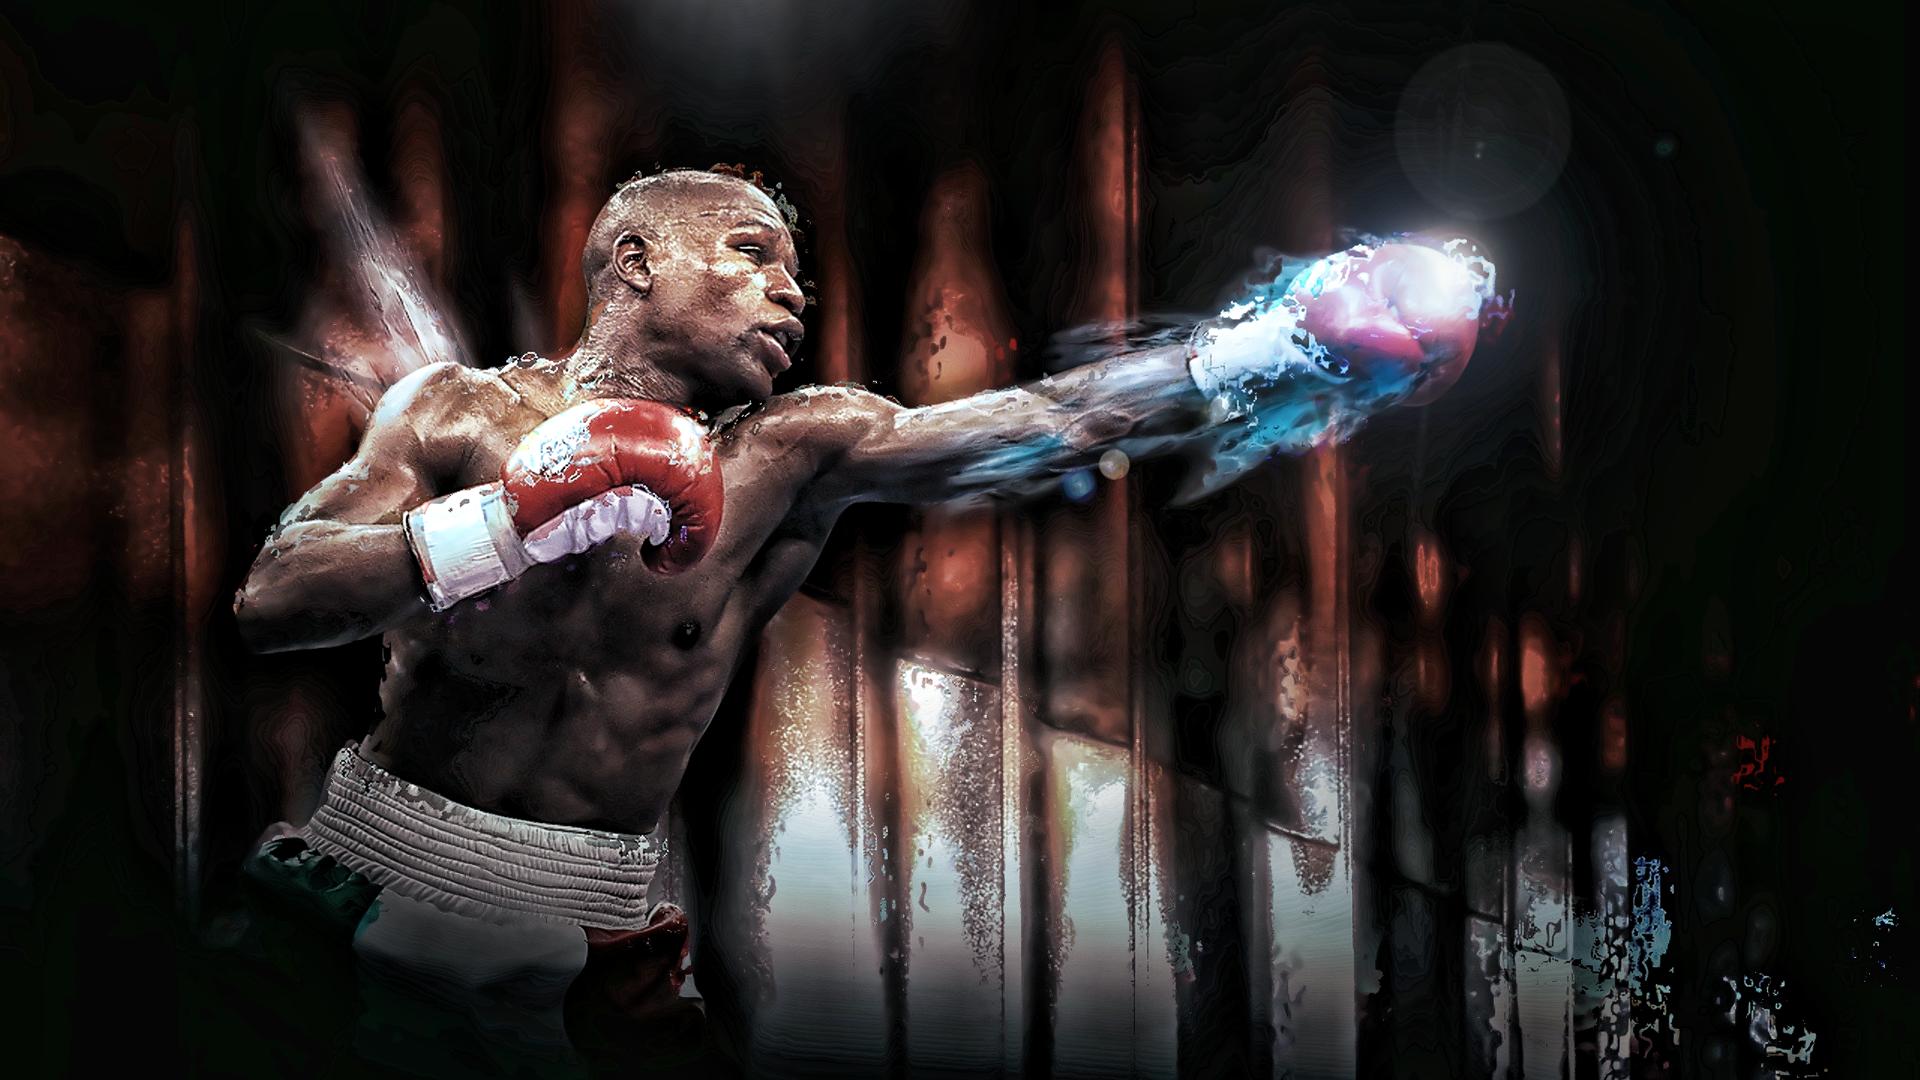 Share 71+ floyd mayweather wallpaper best - in.cdgdbentre